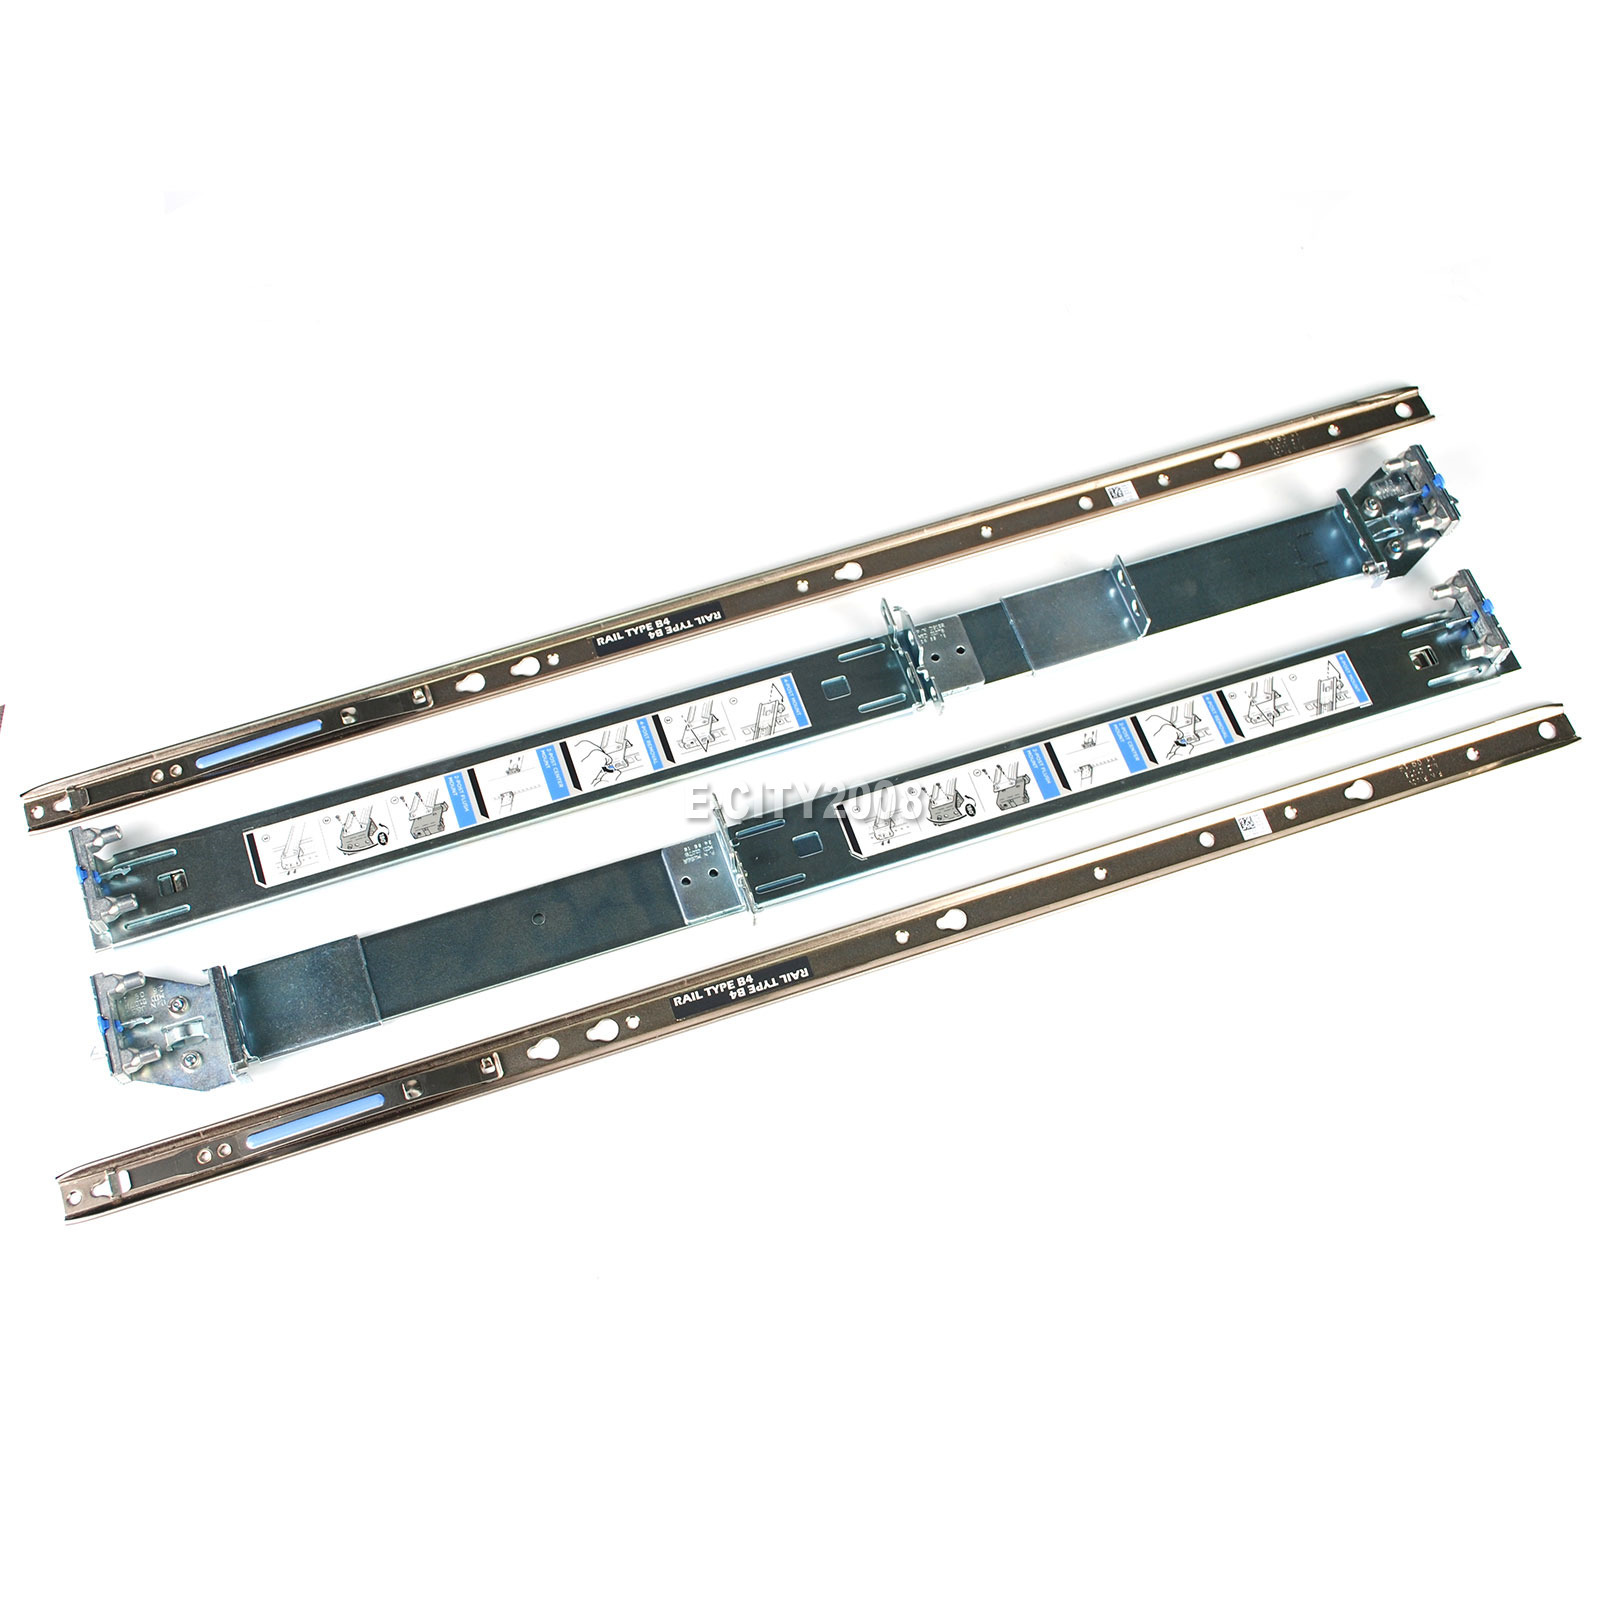 Primary image for For Dell H872R PowerEdge R520 R720 R730 R820 Server 2U 2/4 Static Ready Rail